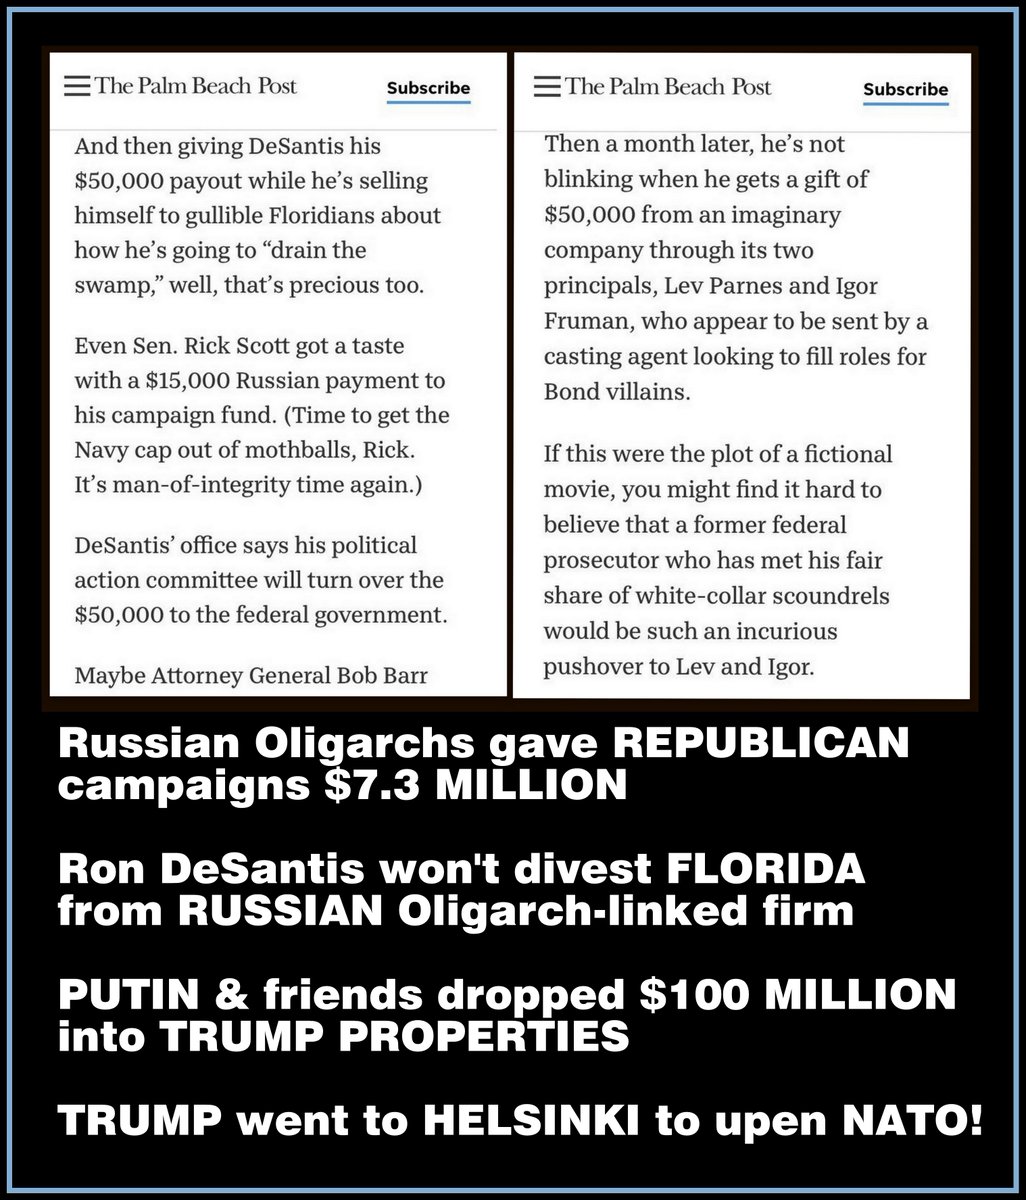 Russian #Oligarchs gave @GOP campaigns $7.3M

@GovRonDeSantis won't divest FL of $300M in Russian investments

@marcorubio got $1.5M in donations from a Russian #Oligarchs-linked firm

Putin & friends dropped $100M into Drumpf properties 

Drumpf went to Helsinki to upend @NATO https://t.co/Ei7jiWGbBX https://t.co/CSV00A3OuD